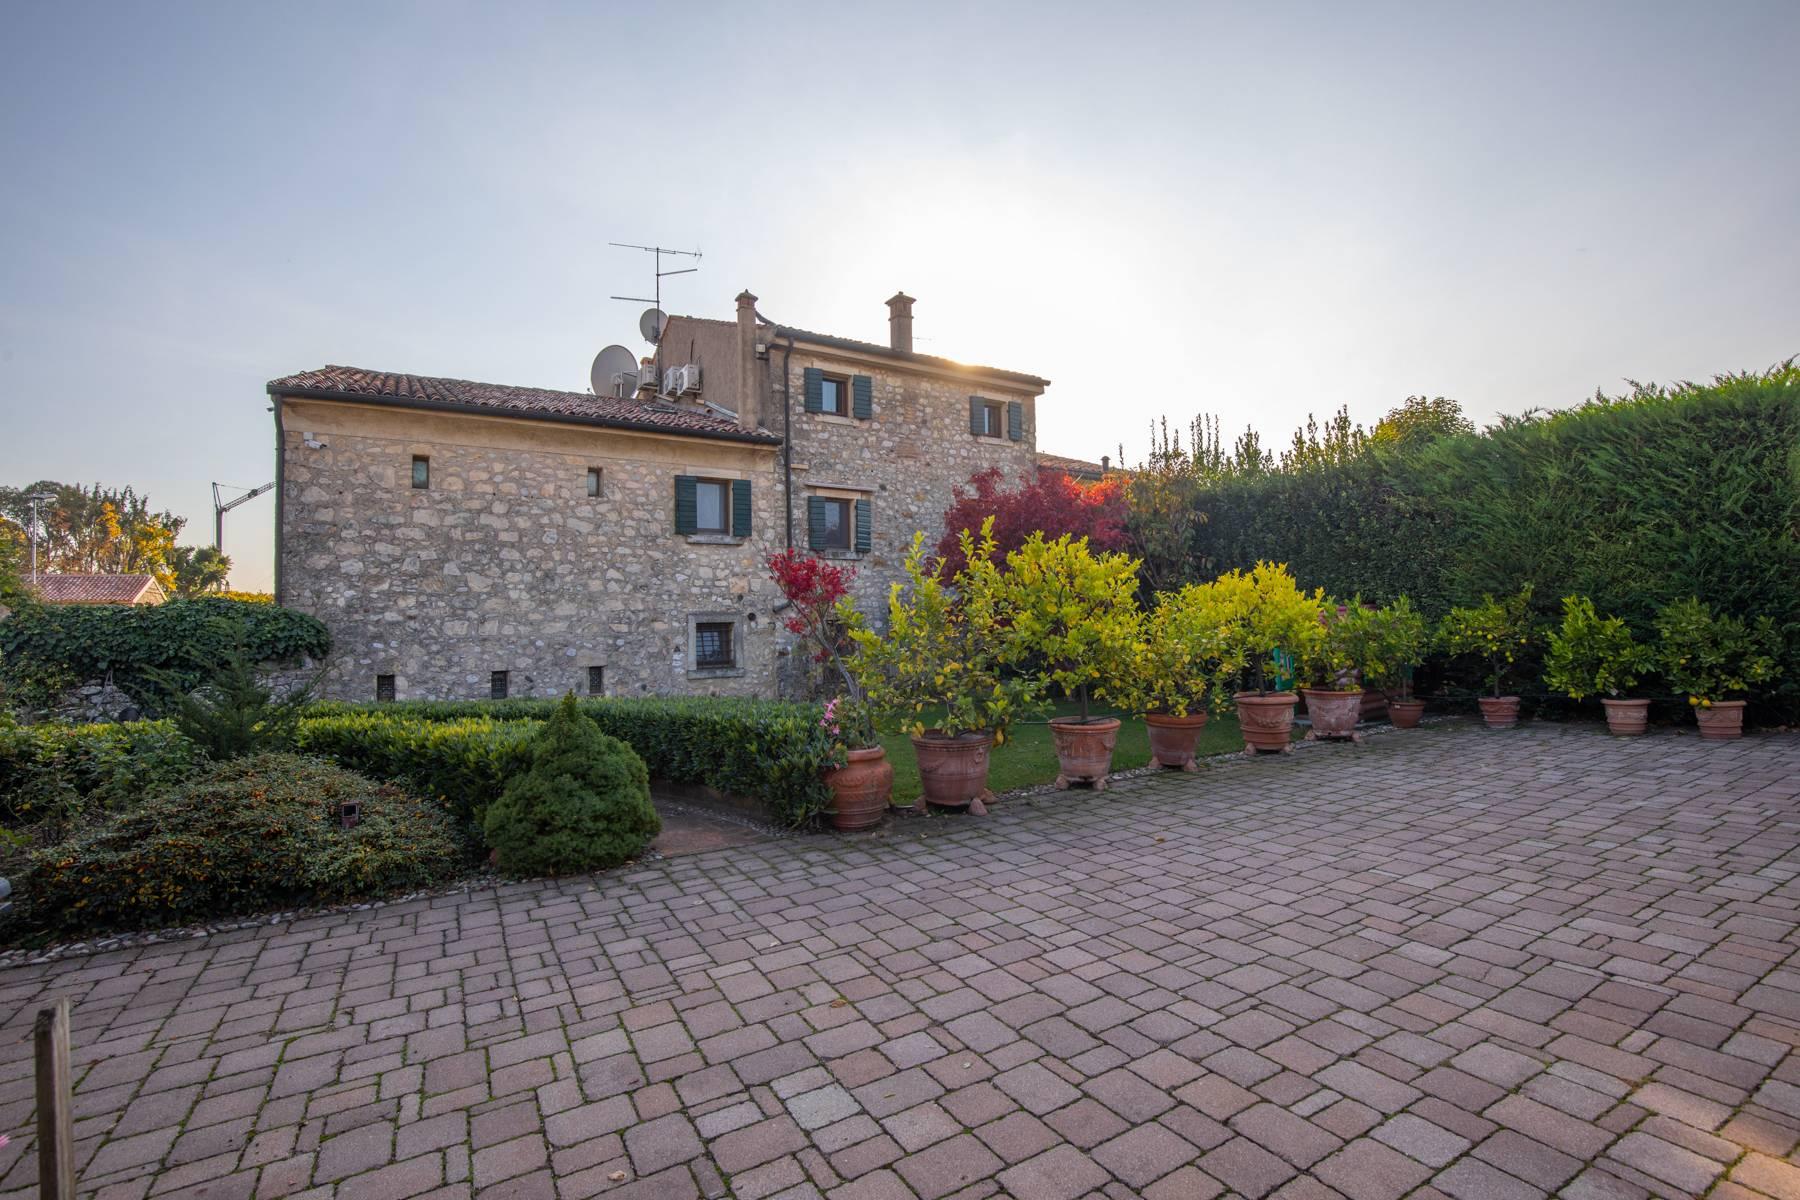 Stunning farmhouse surrounded by vineyards in the Valpolicella area - 2